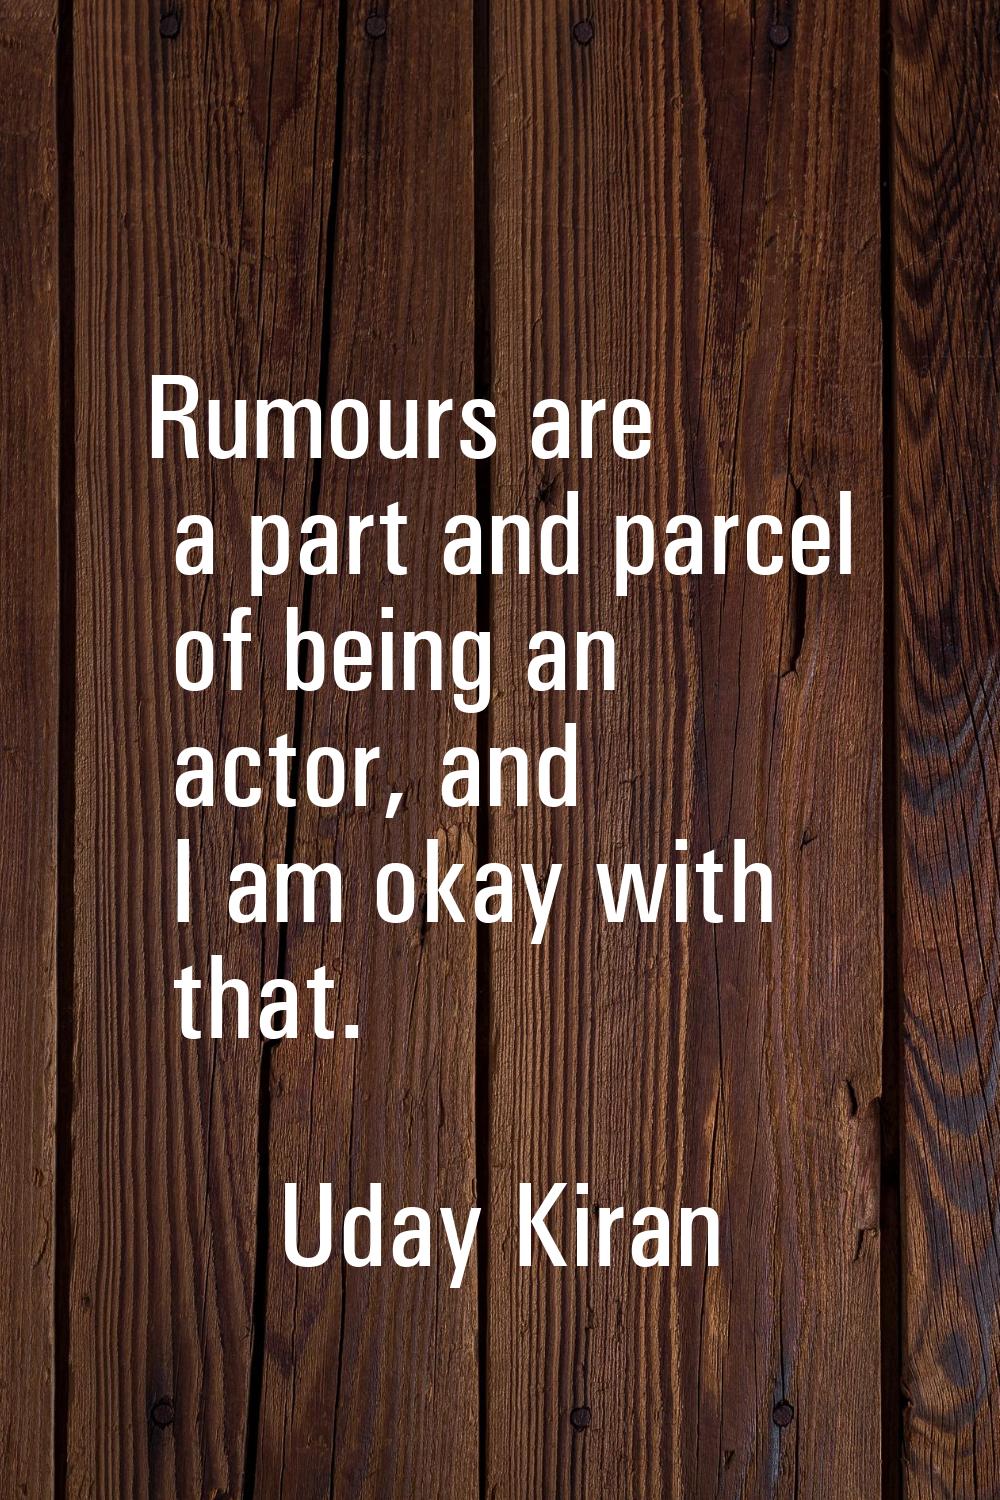 Rumours are a part and parcel of being an actor, and I am okay with that.